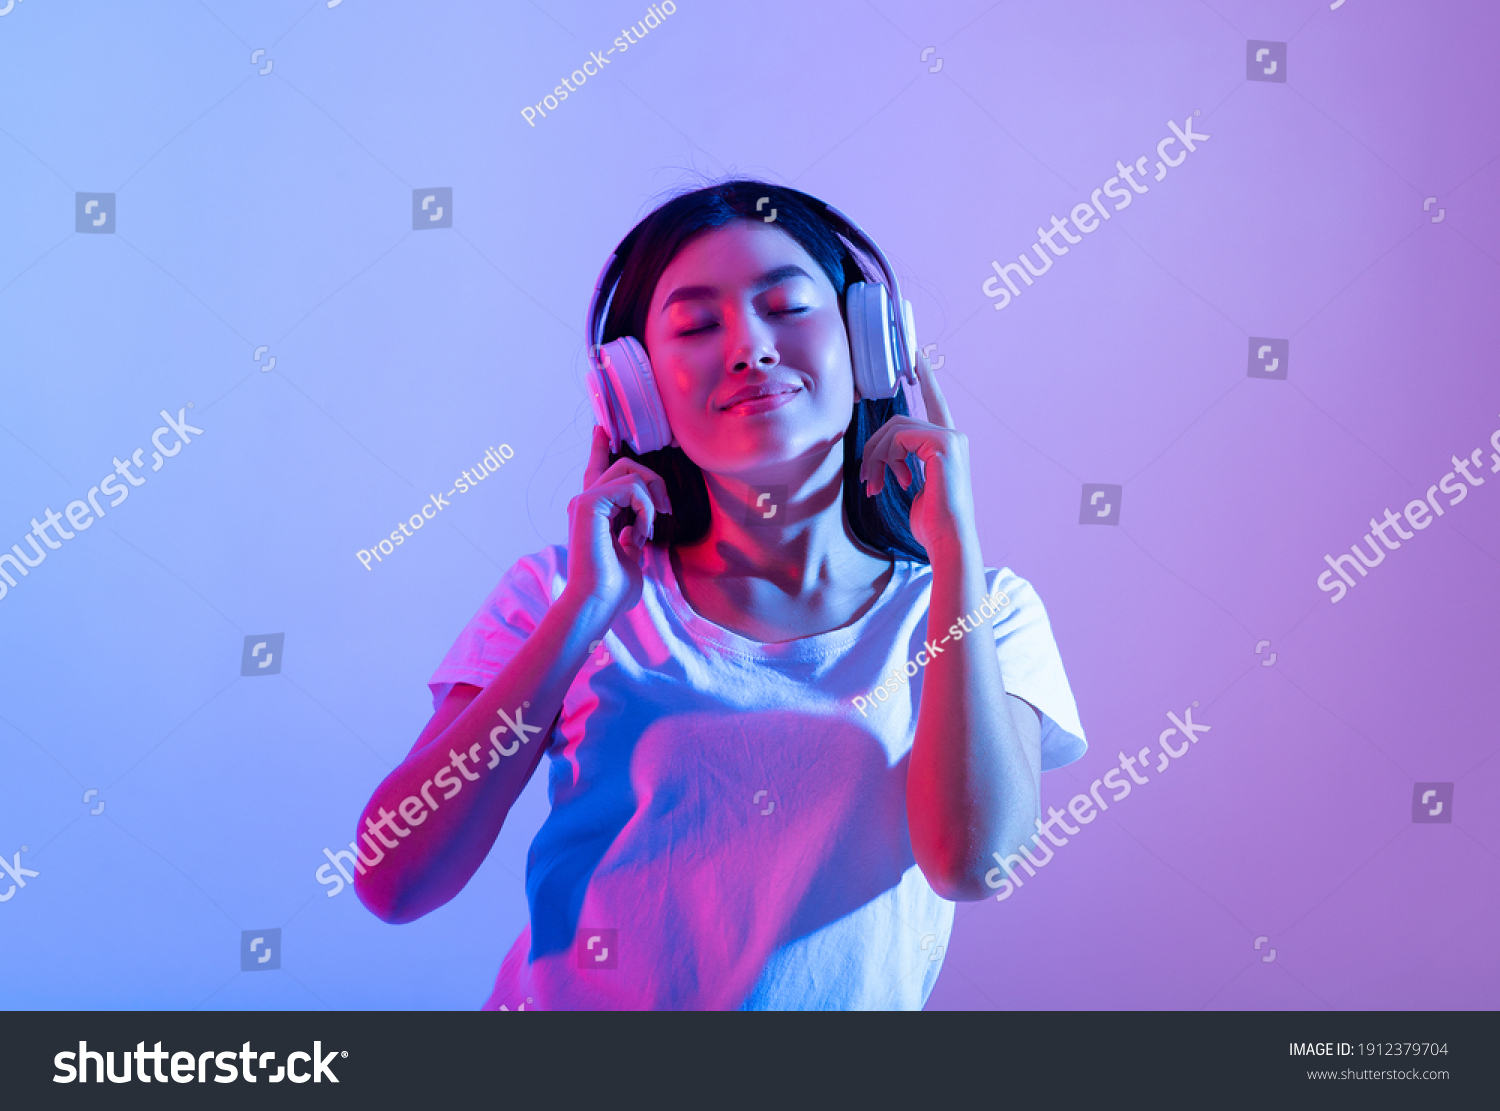 Stay alone at home during covid-19 and relax at spare time with music. Smiling calm millennial asian lady in modern headphones with closed eyes enjoying song in audio app, in neon, studio shot #1912379704